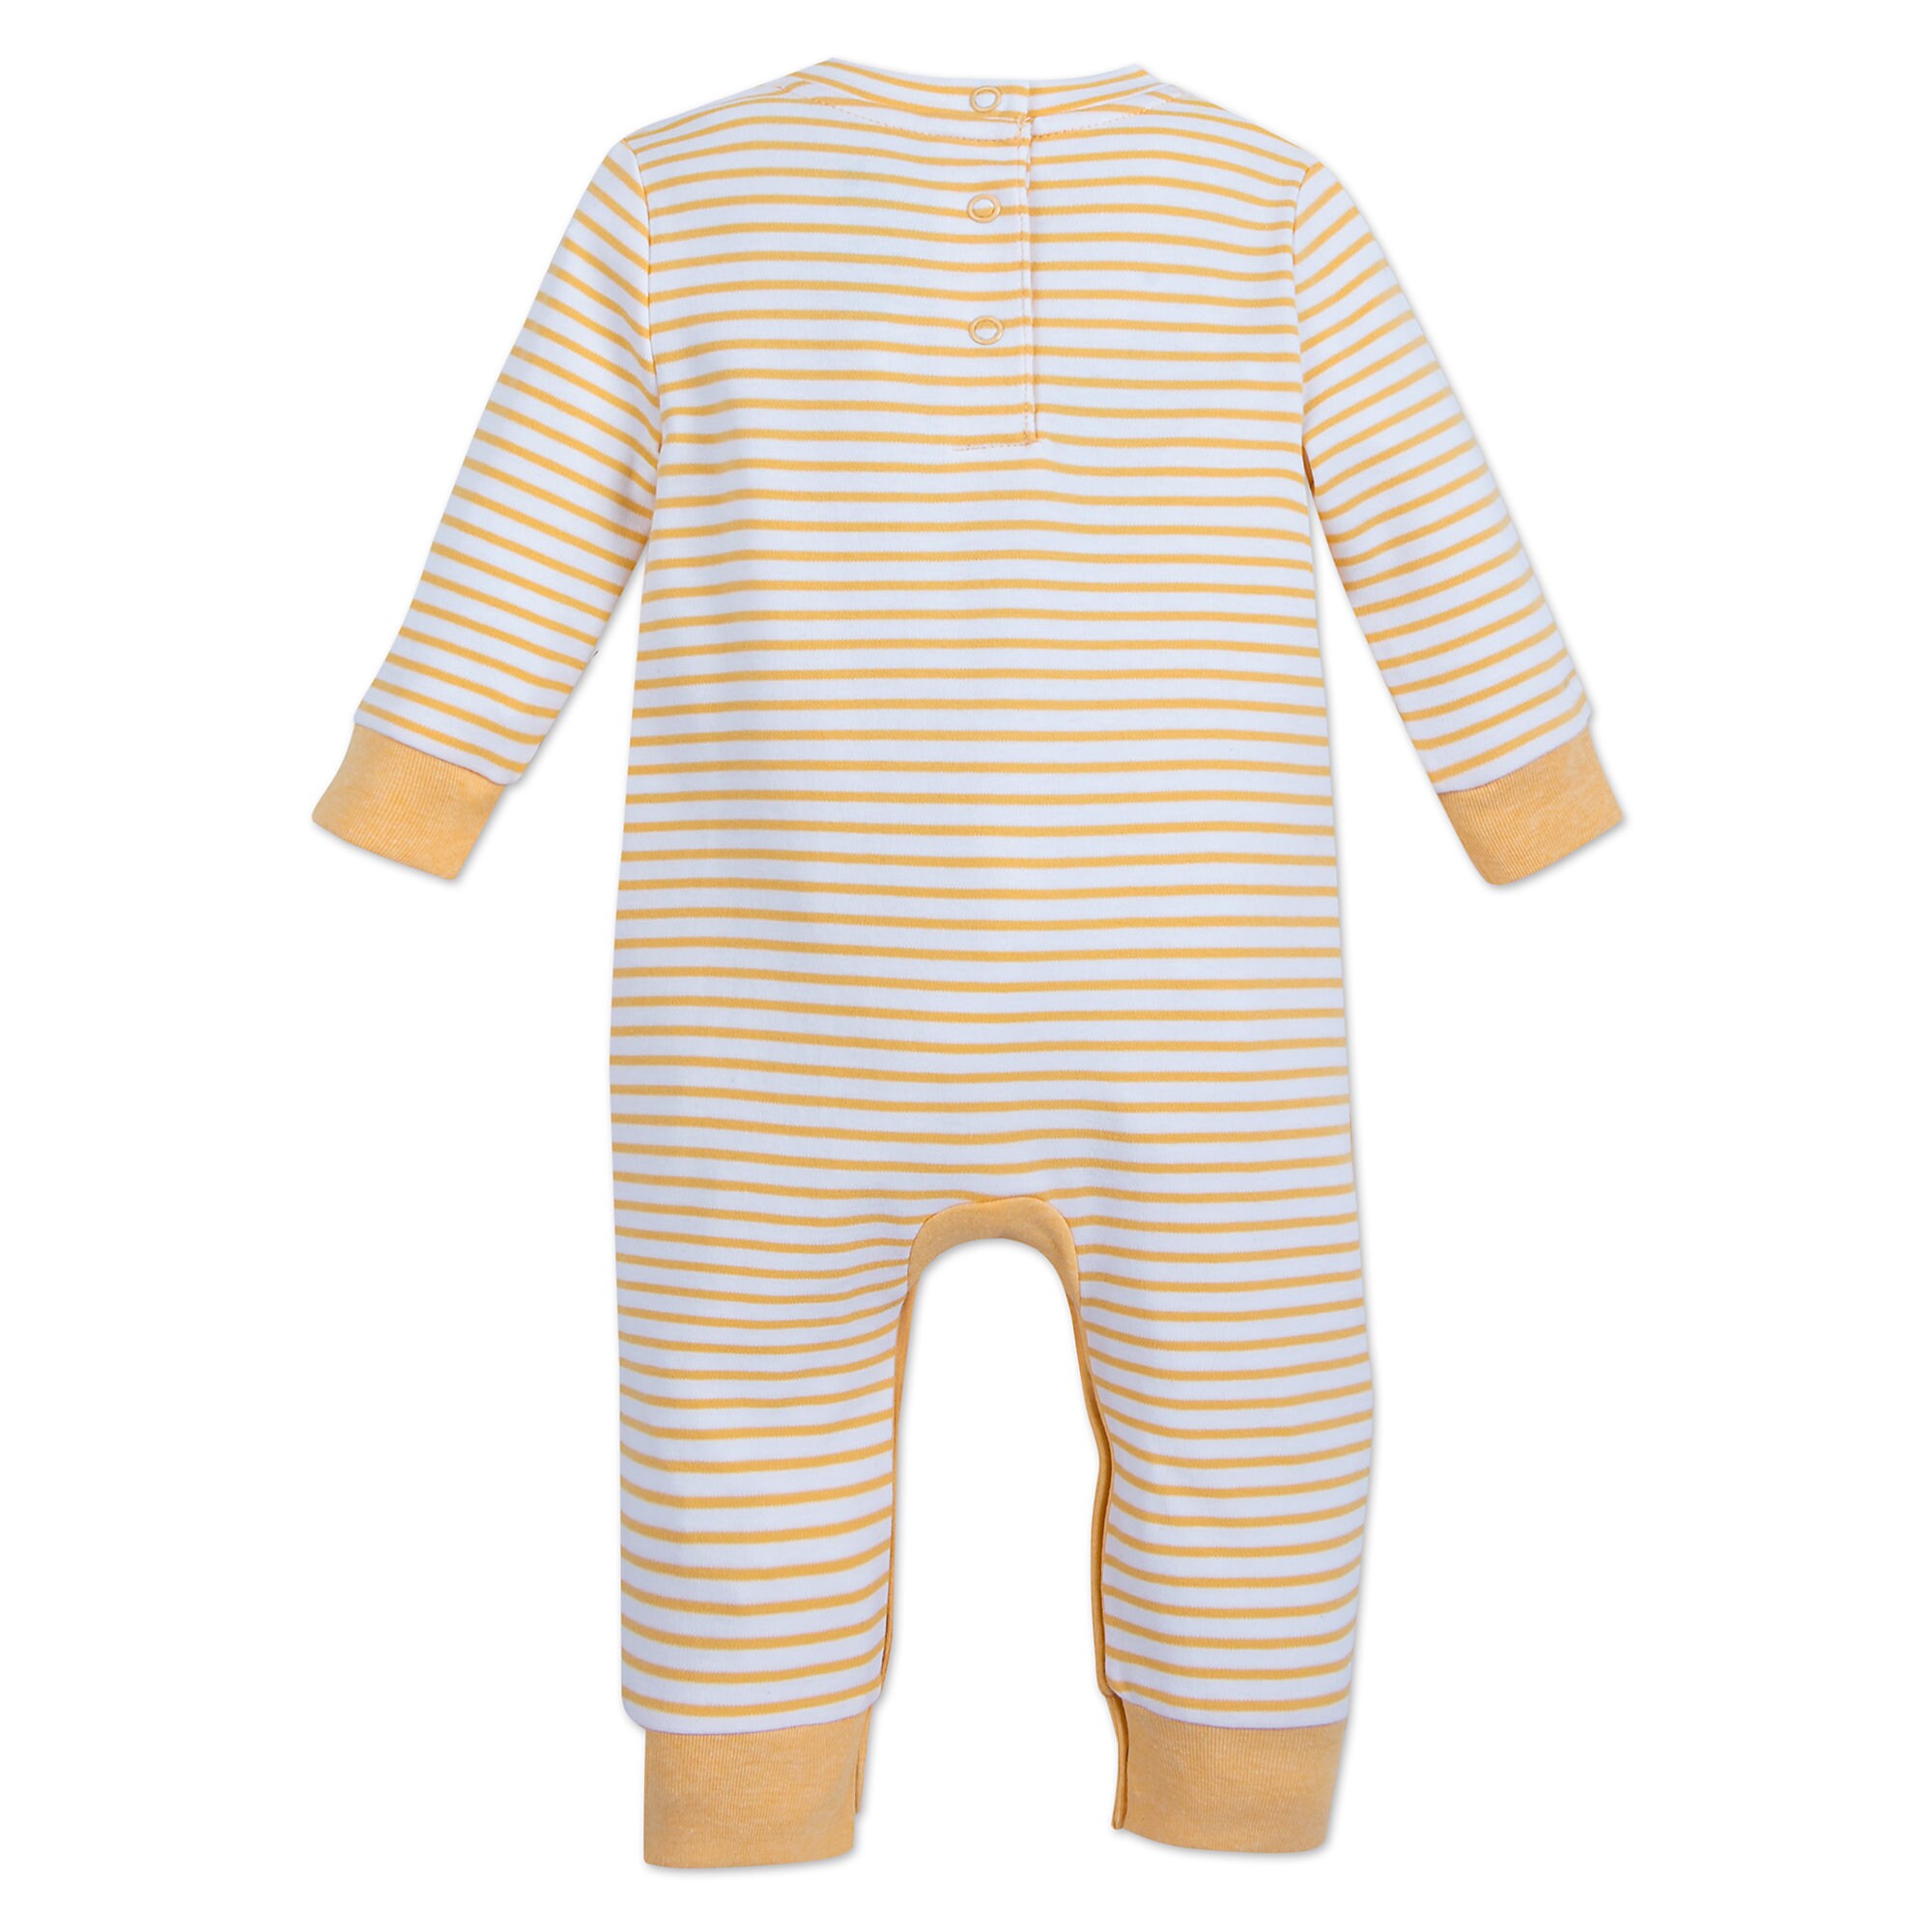 Winnie the Pooh Romper for Baby